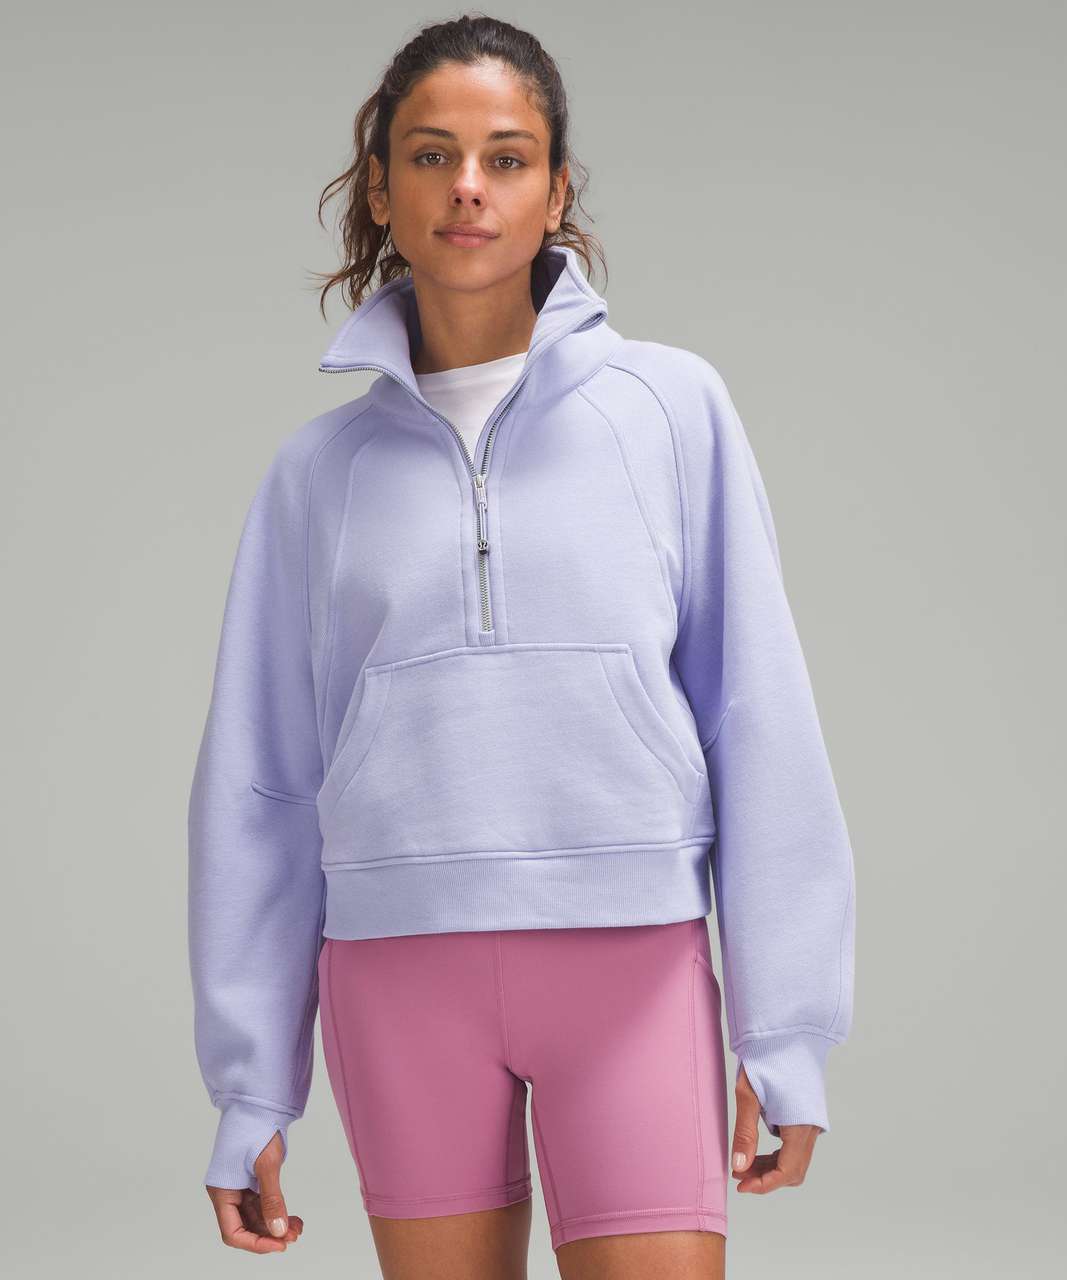 Lululemon Scuba Oversized 1/2 Zip Hoodie In dusky Lavender XS/S NWT Purple  - $177 New With Tags - From daisy